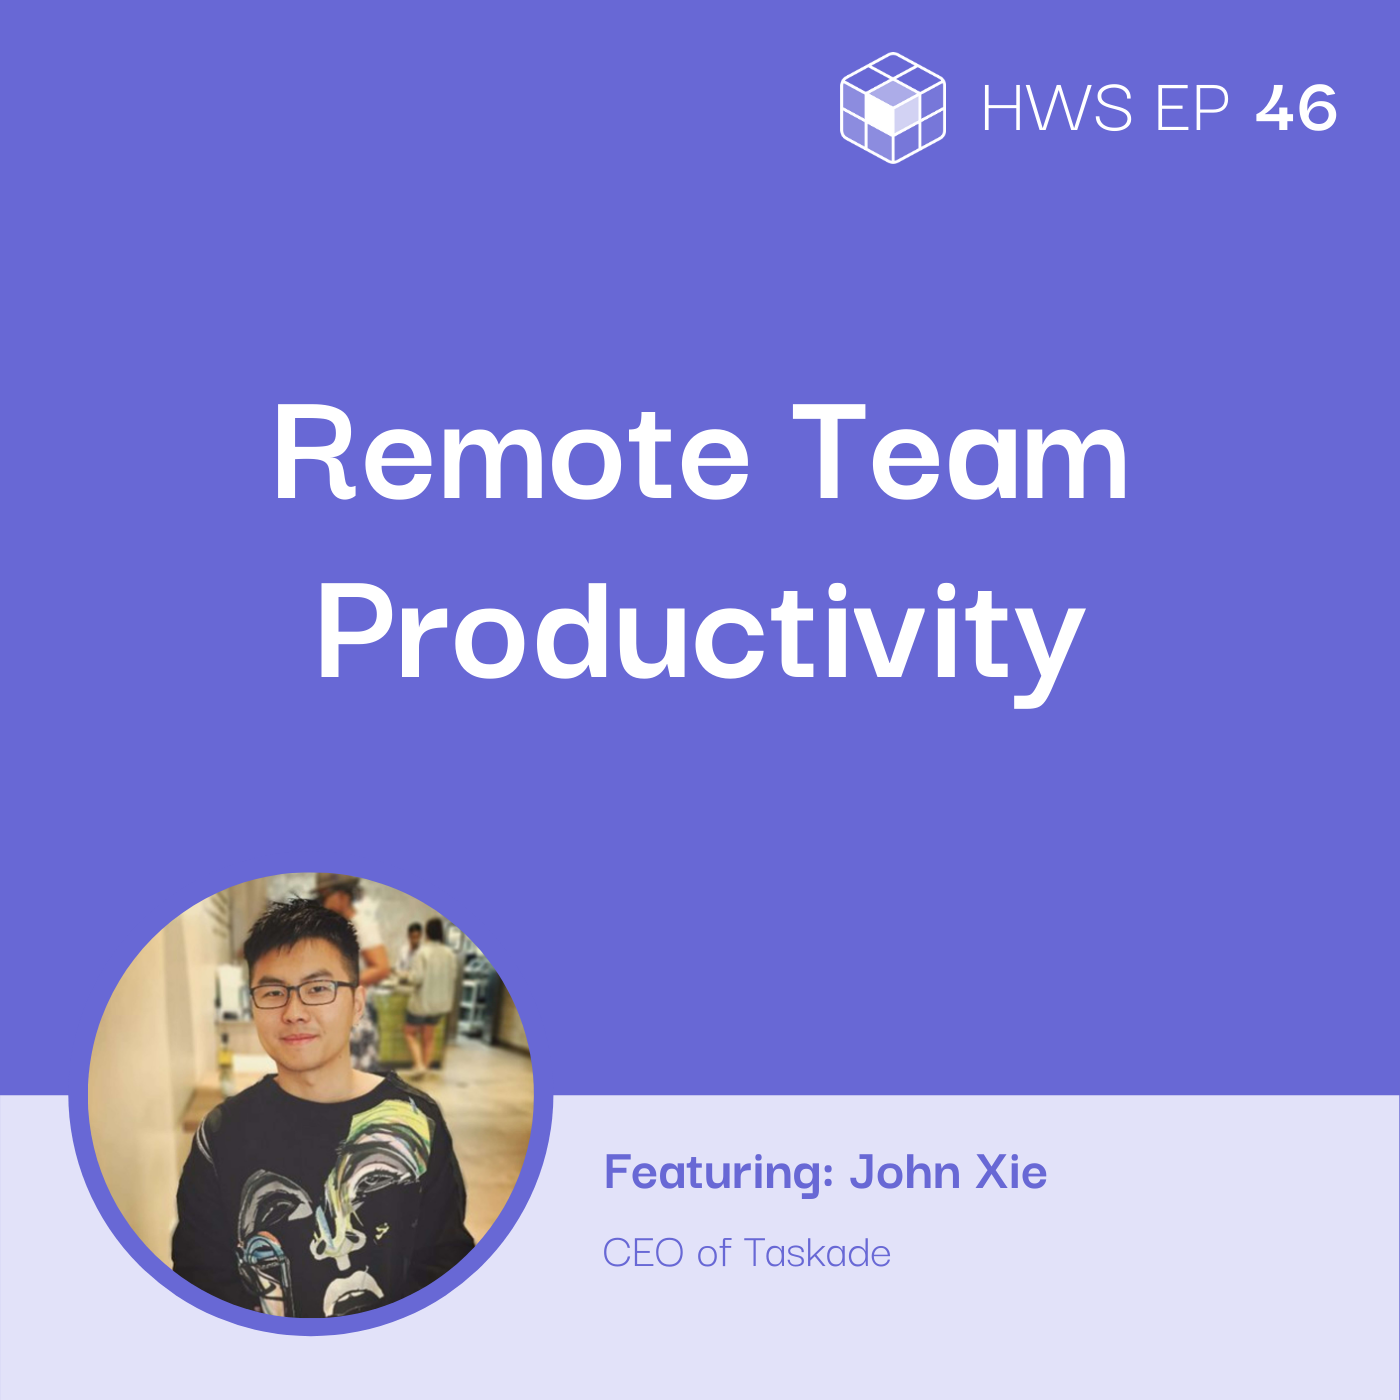 John Xie from Taskade shares how to ensure your remote team productivity is on a high level